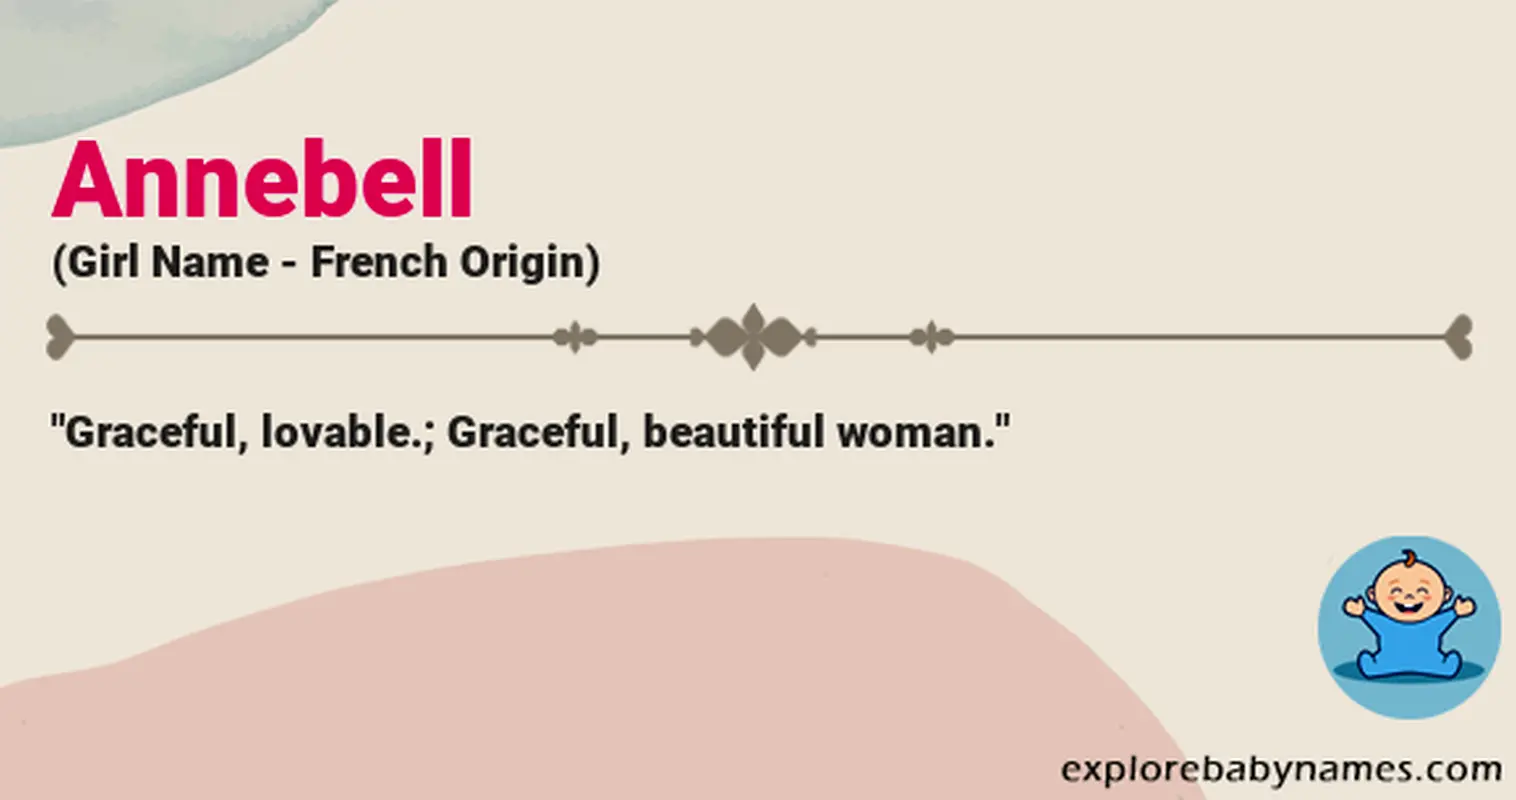 Meaning of Annebell